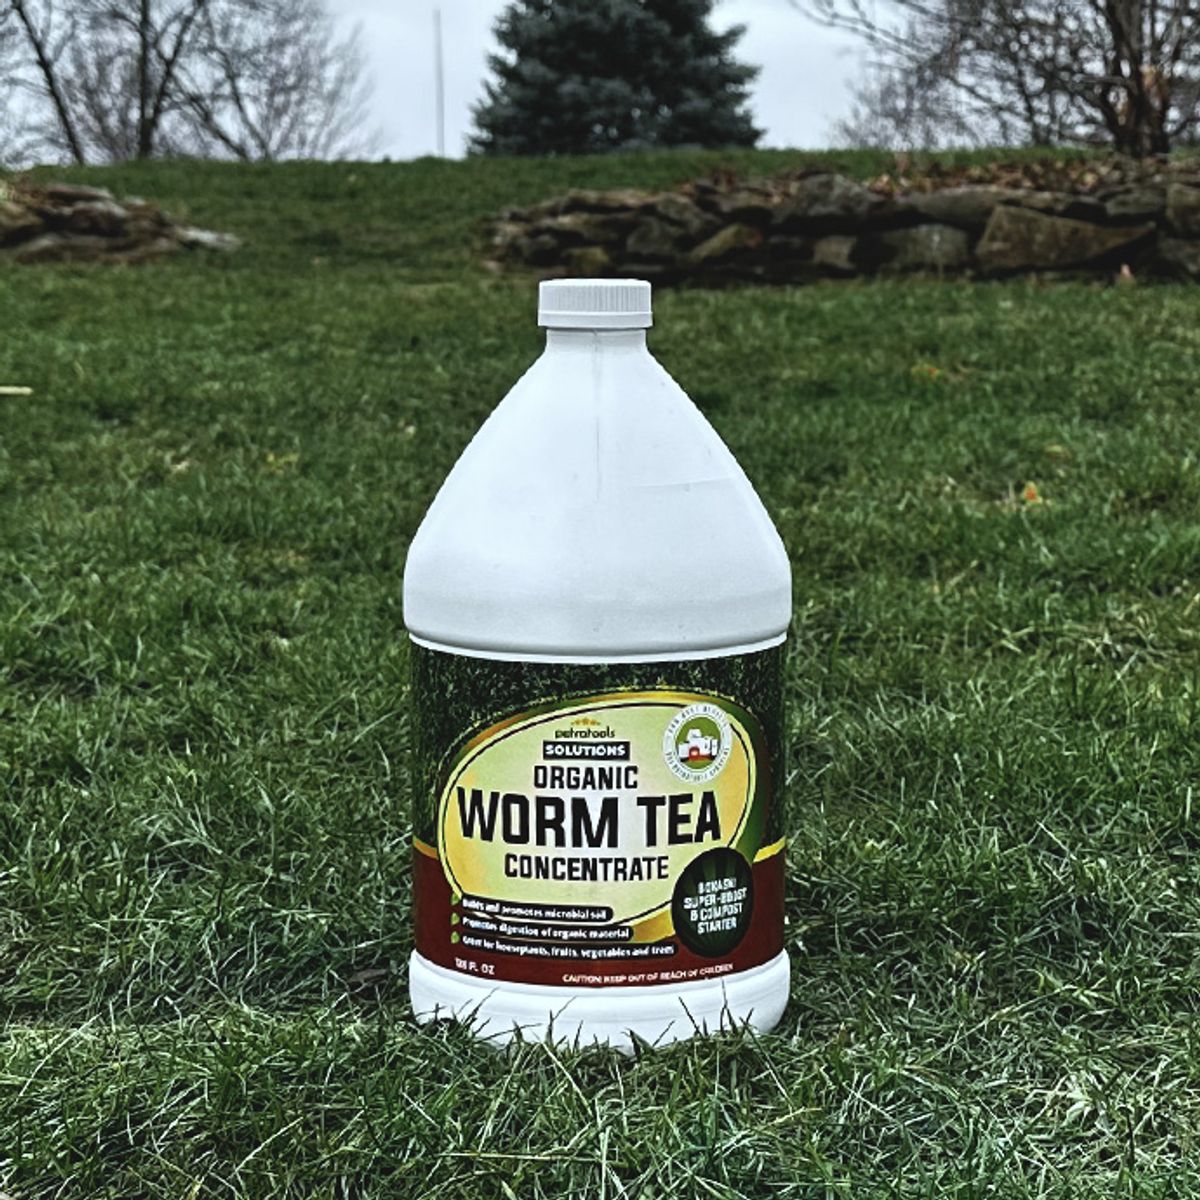 What's in Worm Tea?